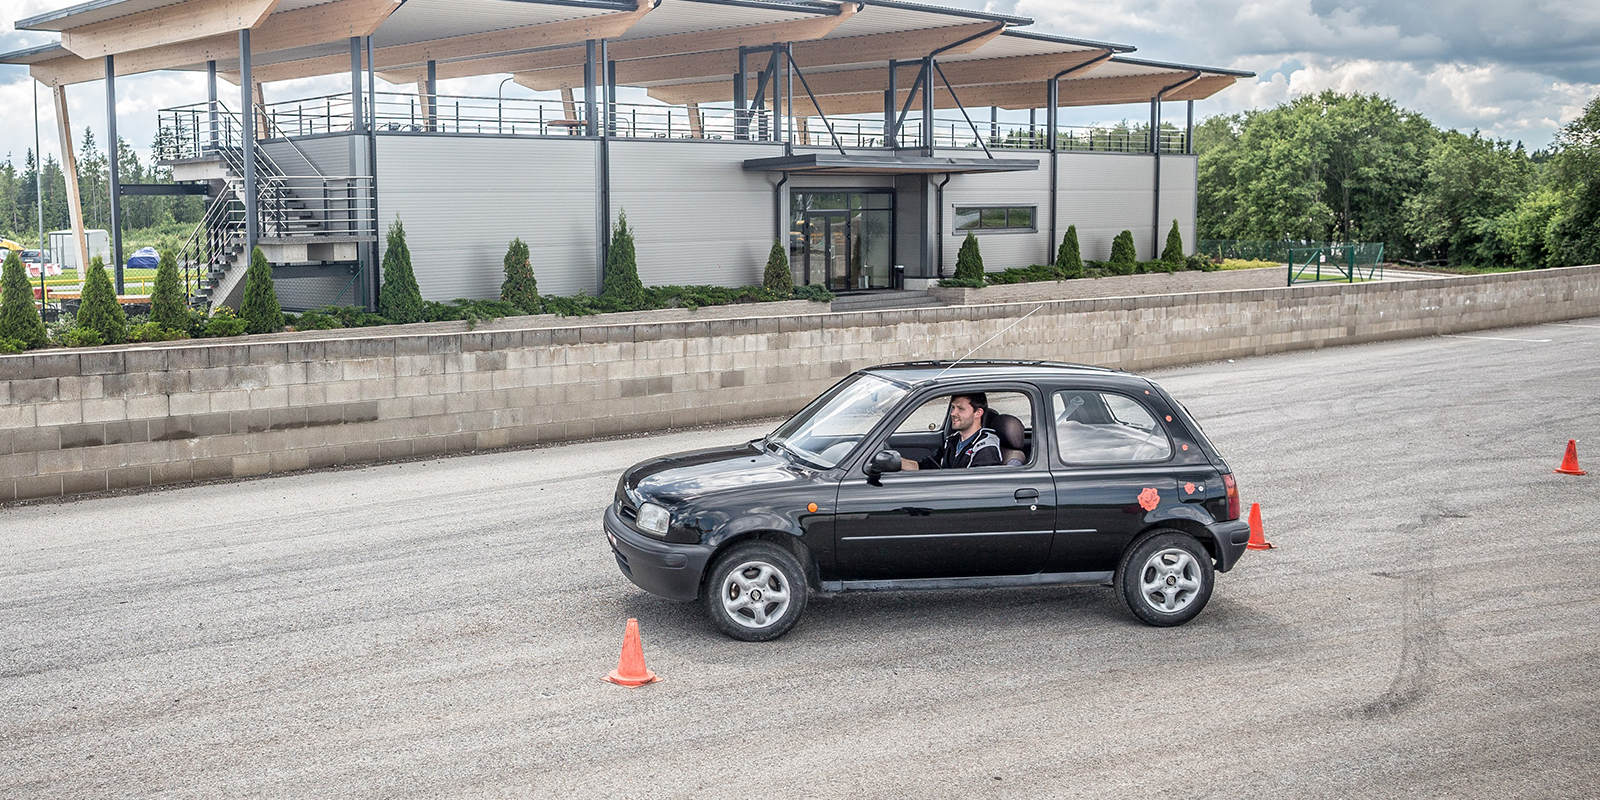 Take a trick car for a slalom ride at LaitseRallyPark!